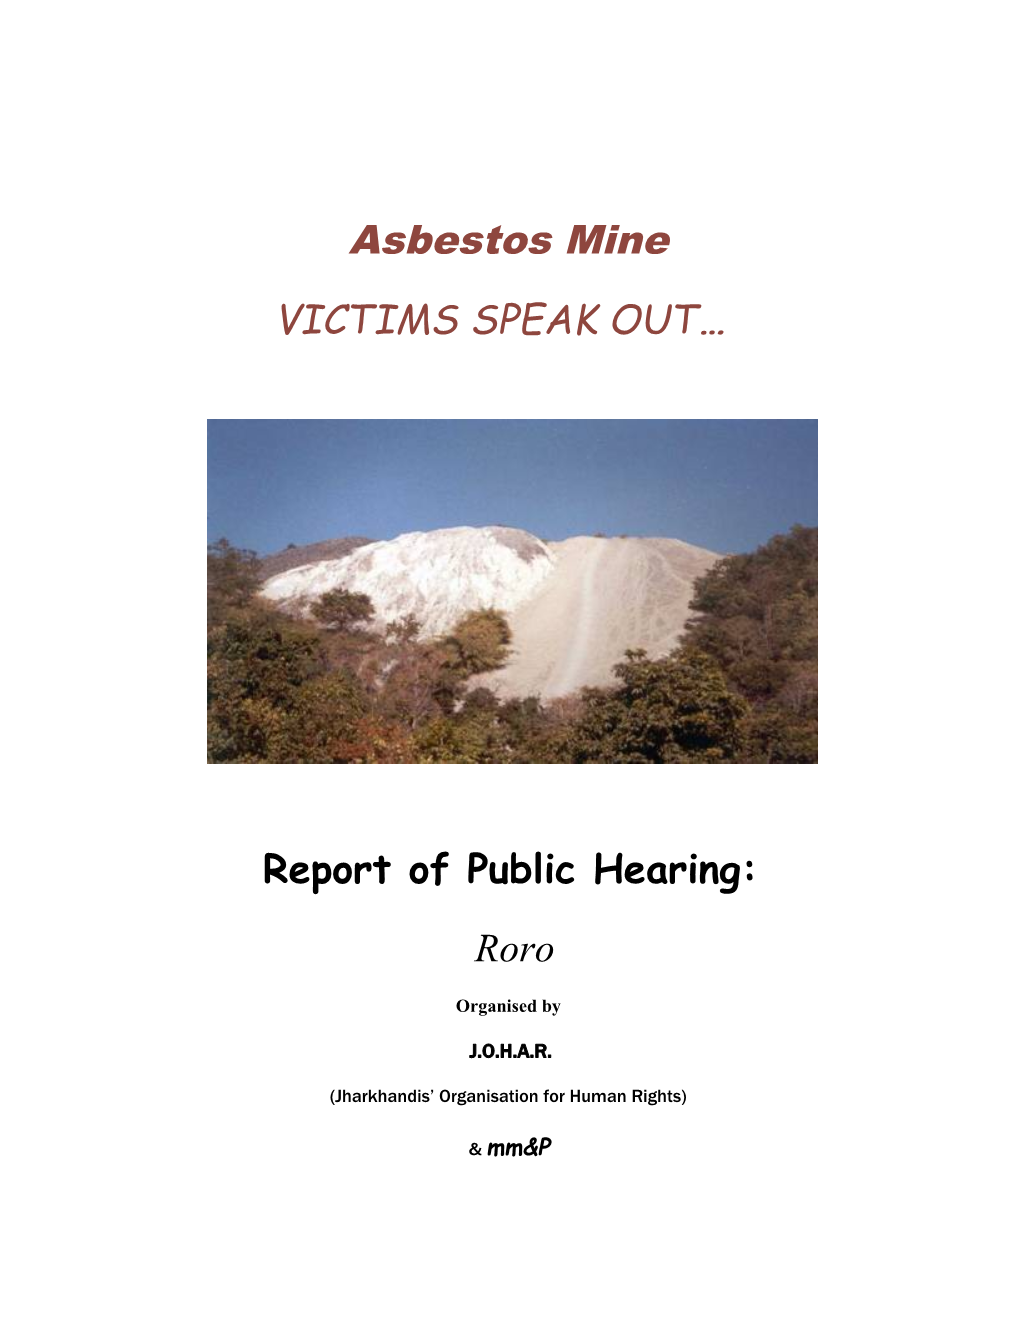 Report of Public Hearing